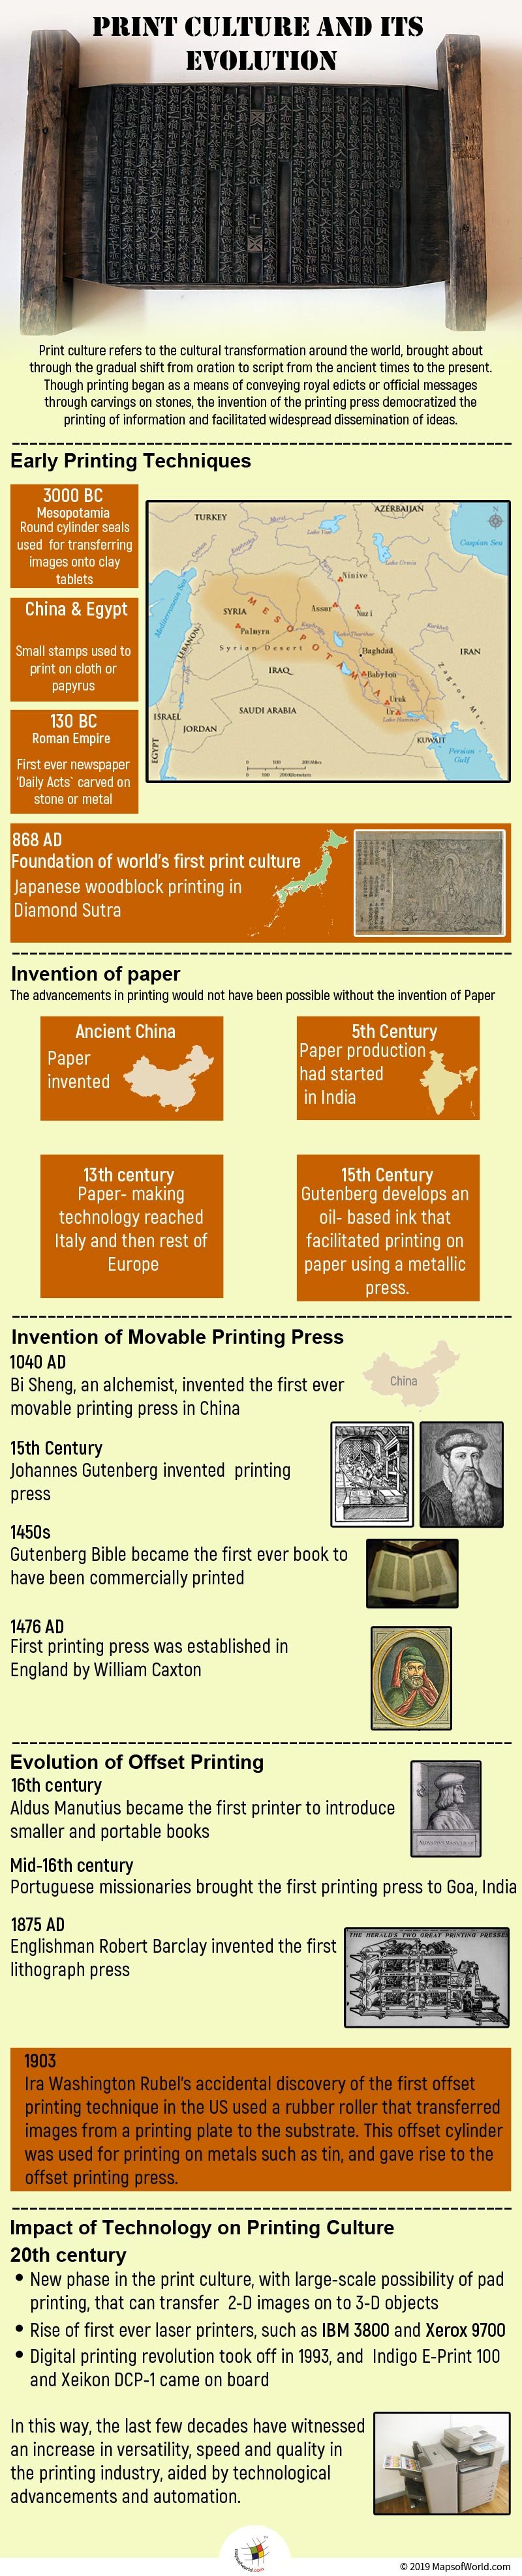 Infographic Showing Evolution of The Print Culture